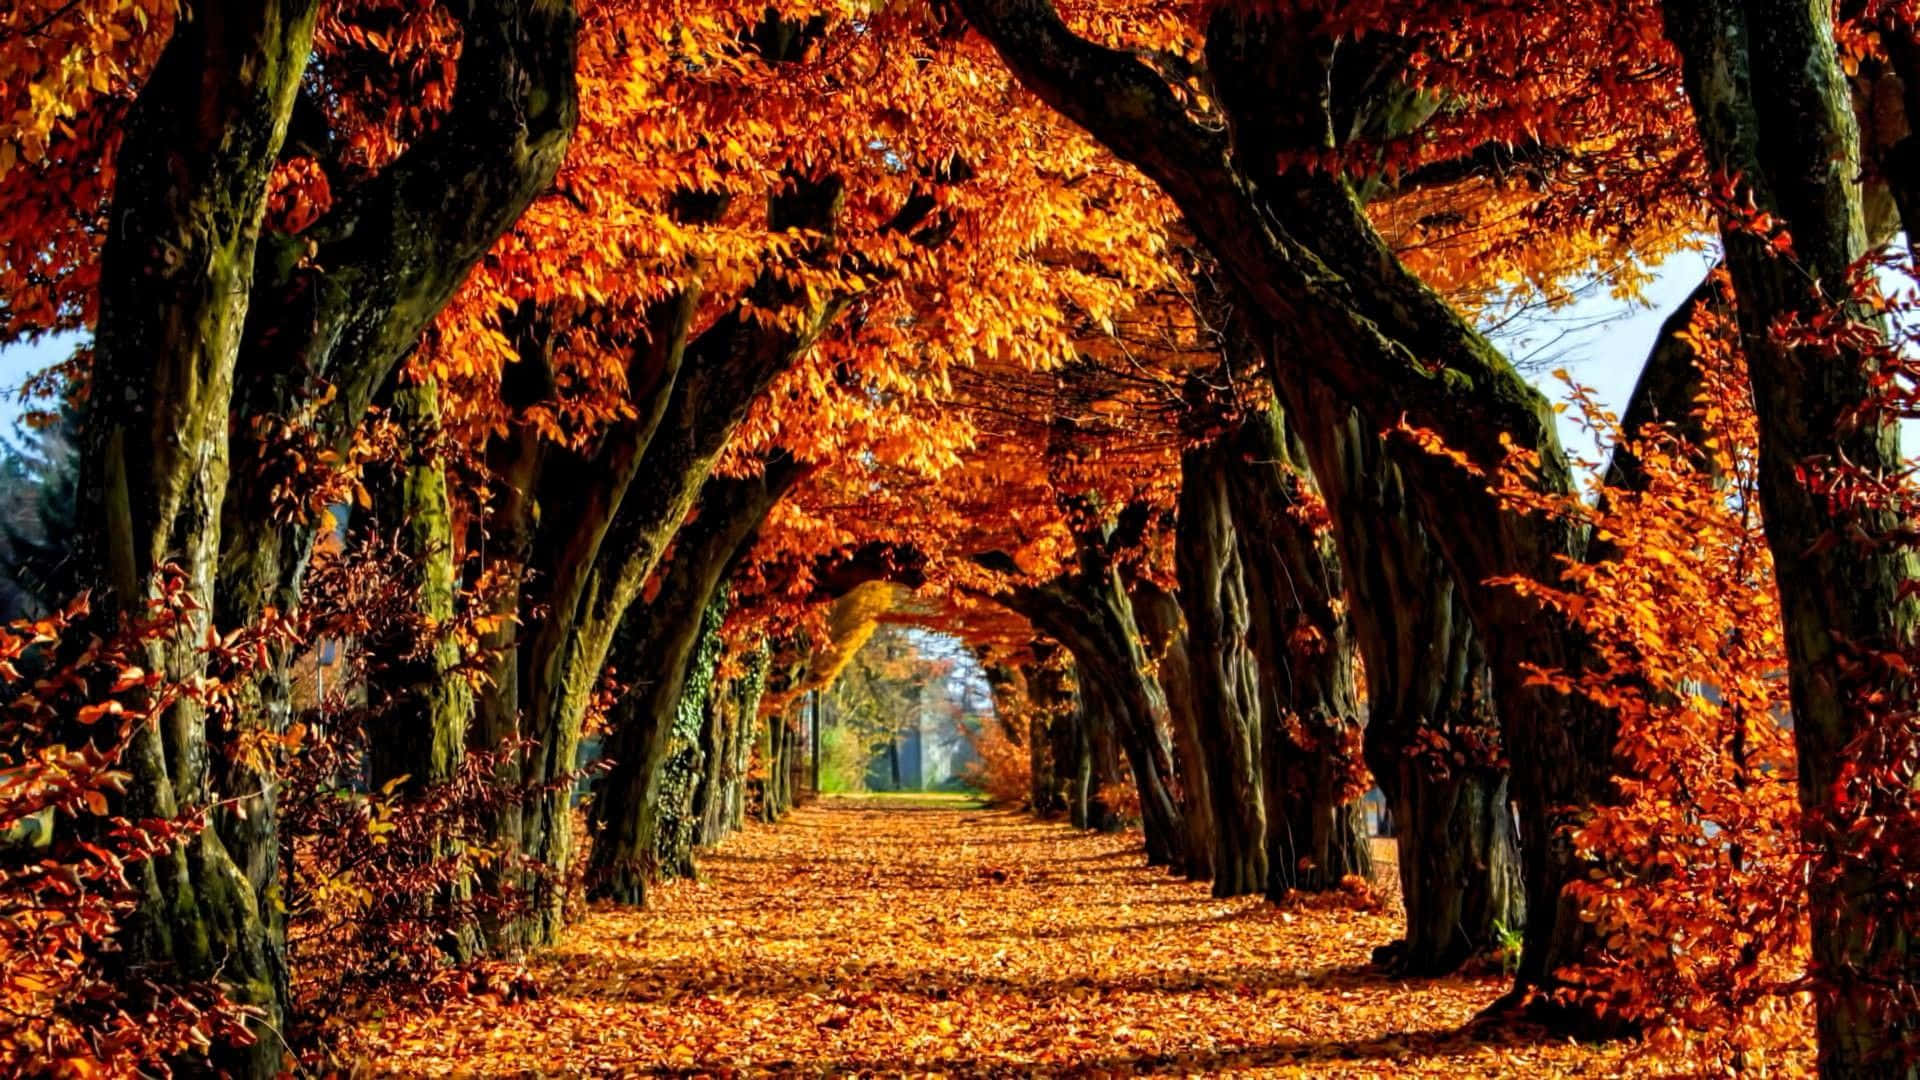 A Pathway Lined With Trees In Autumn